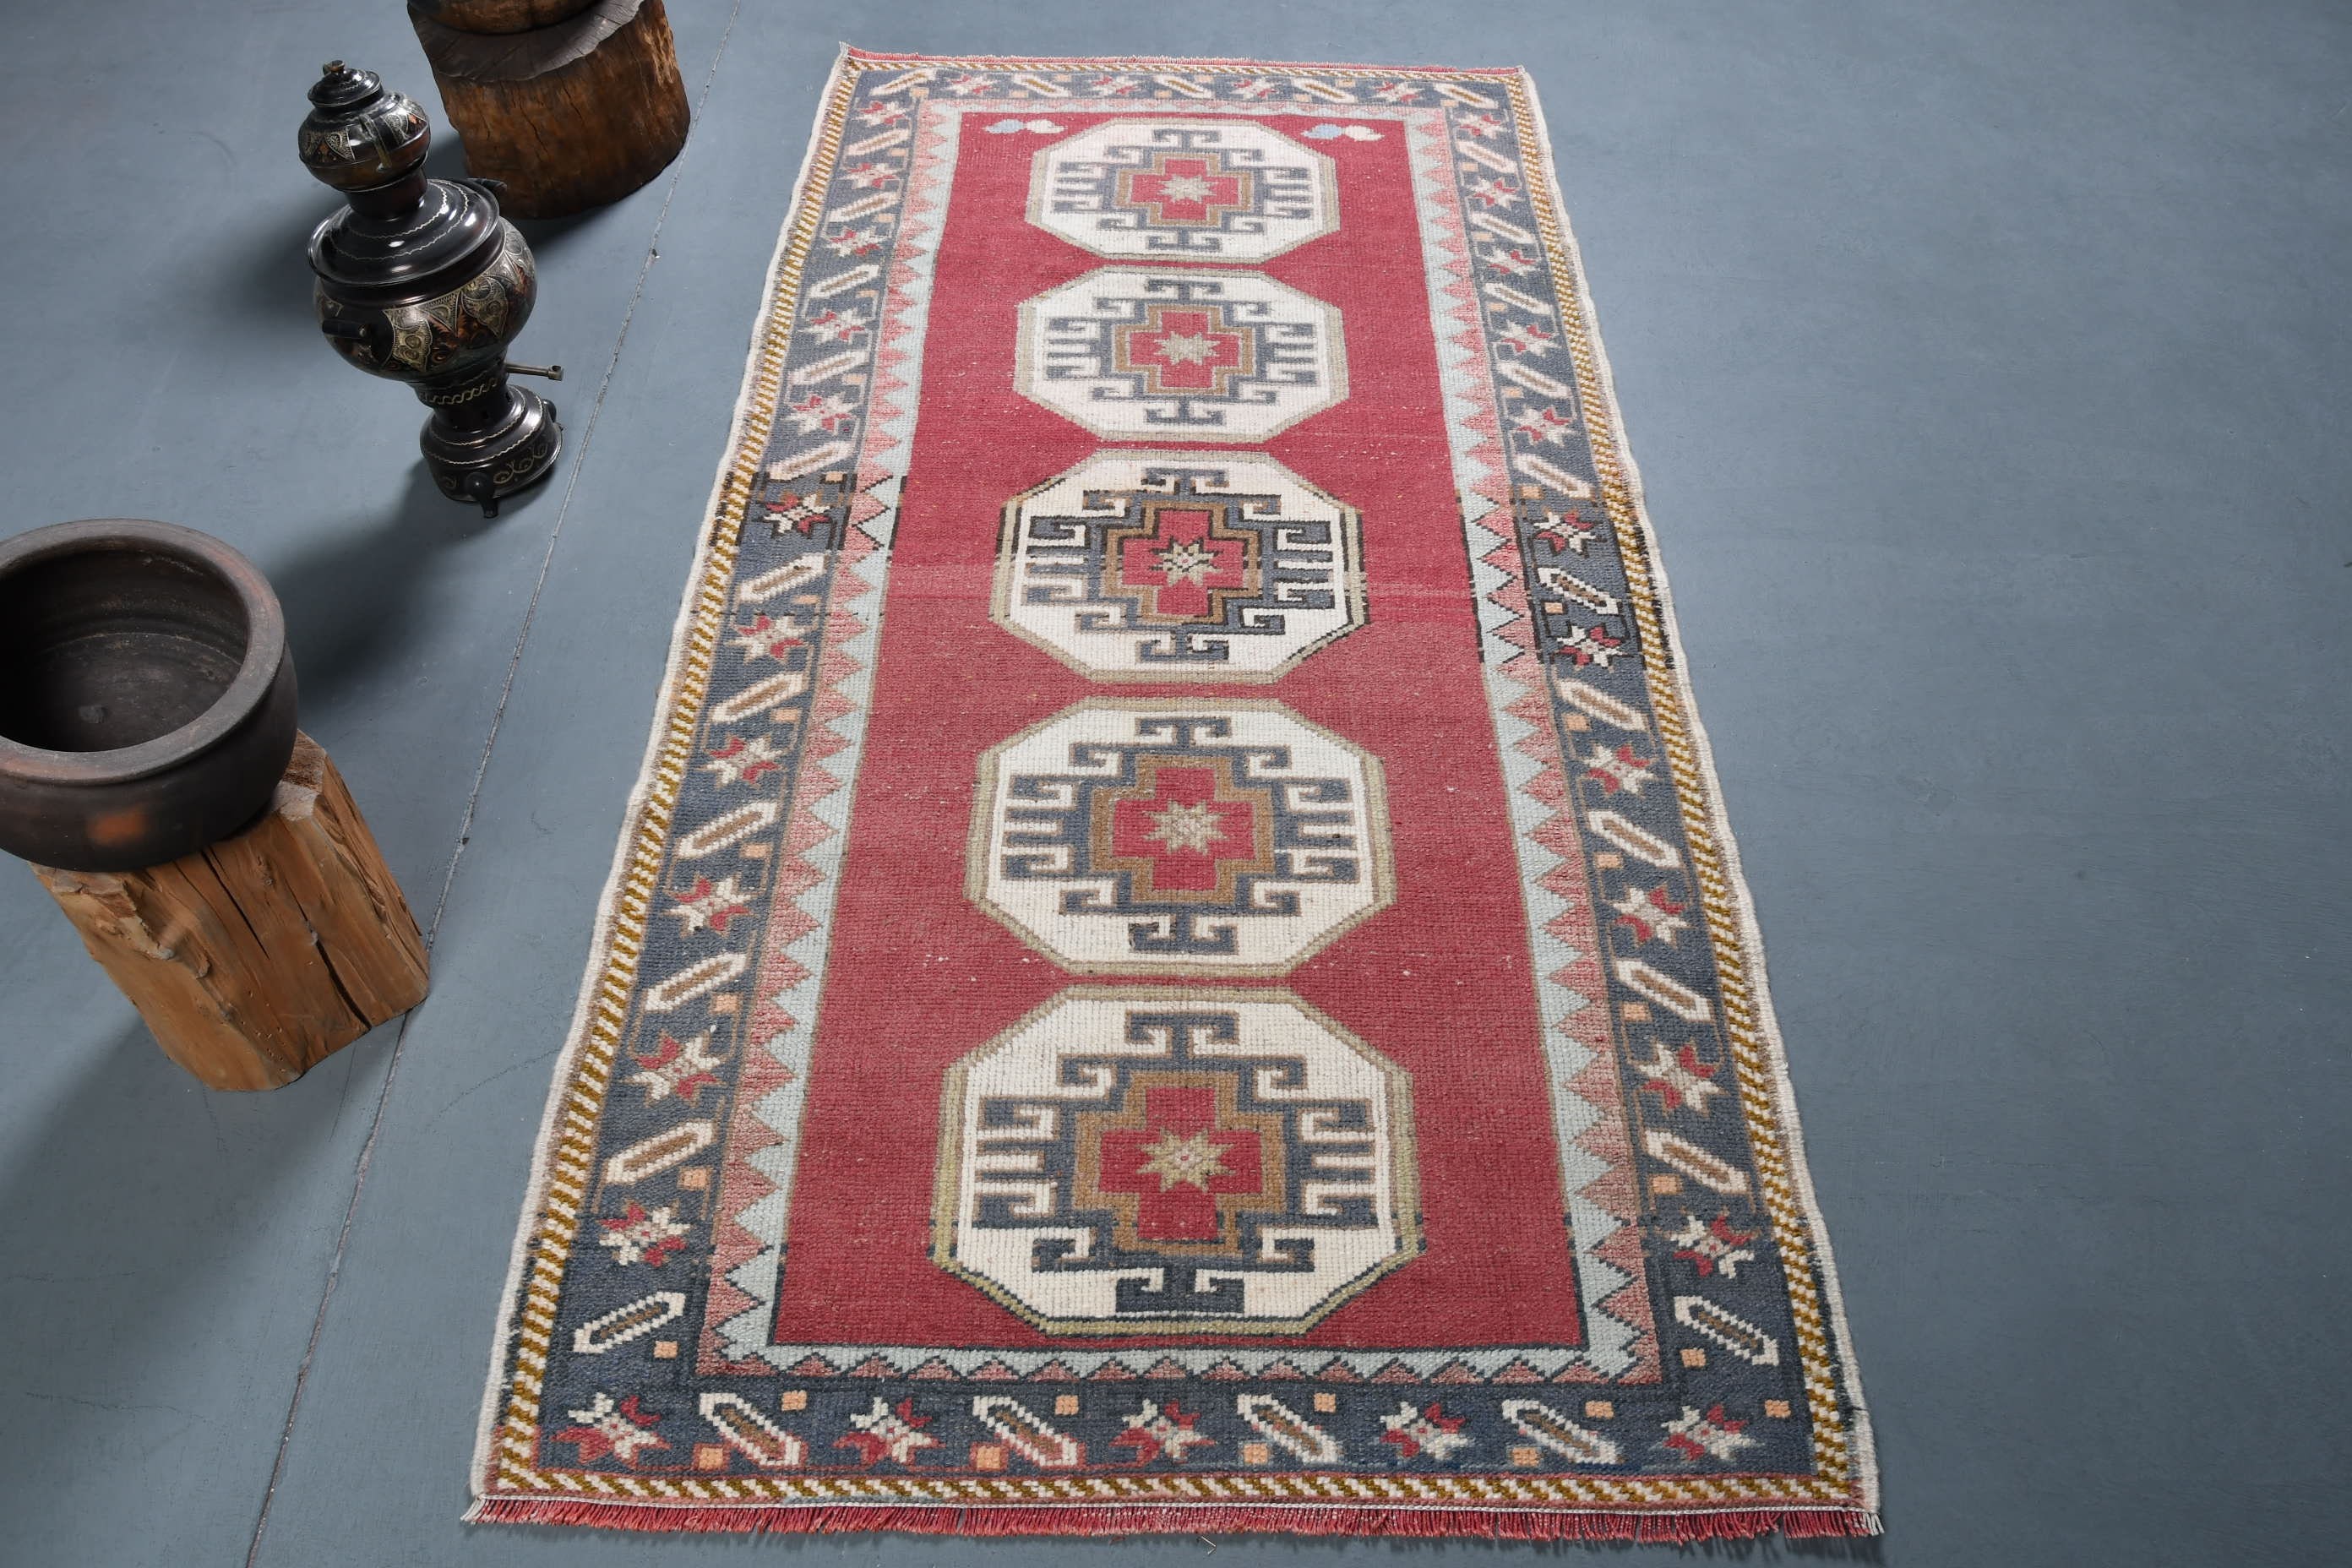 Entry Rugs, Oushak Rugs, Red Home Decor Rug, 3.3x6.8 ft Accent Rug, Ethnic Rug, Vintage Rugs, Turkish Rugs, Home Decor Rug, Bedroom Rug